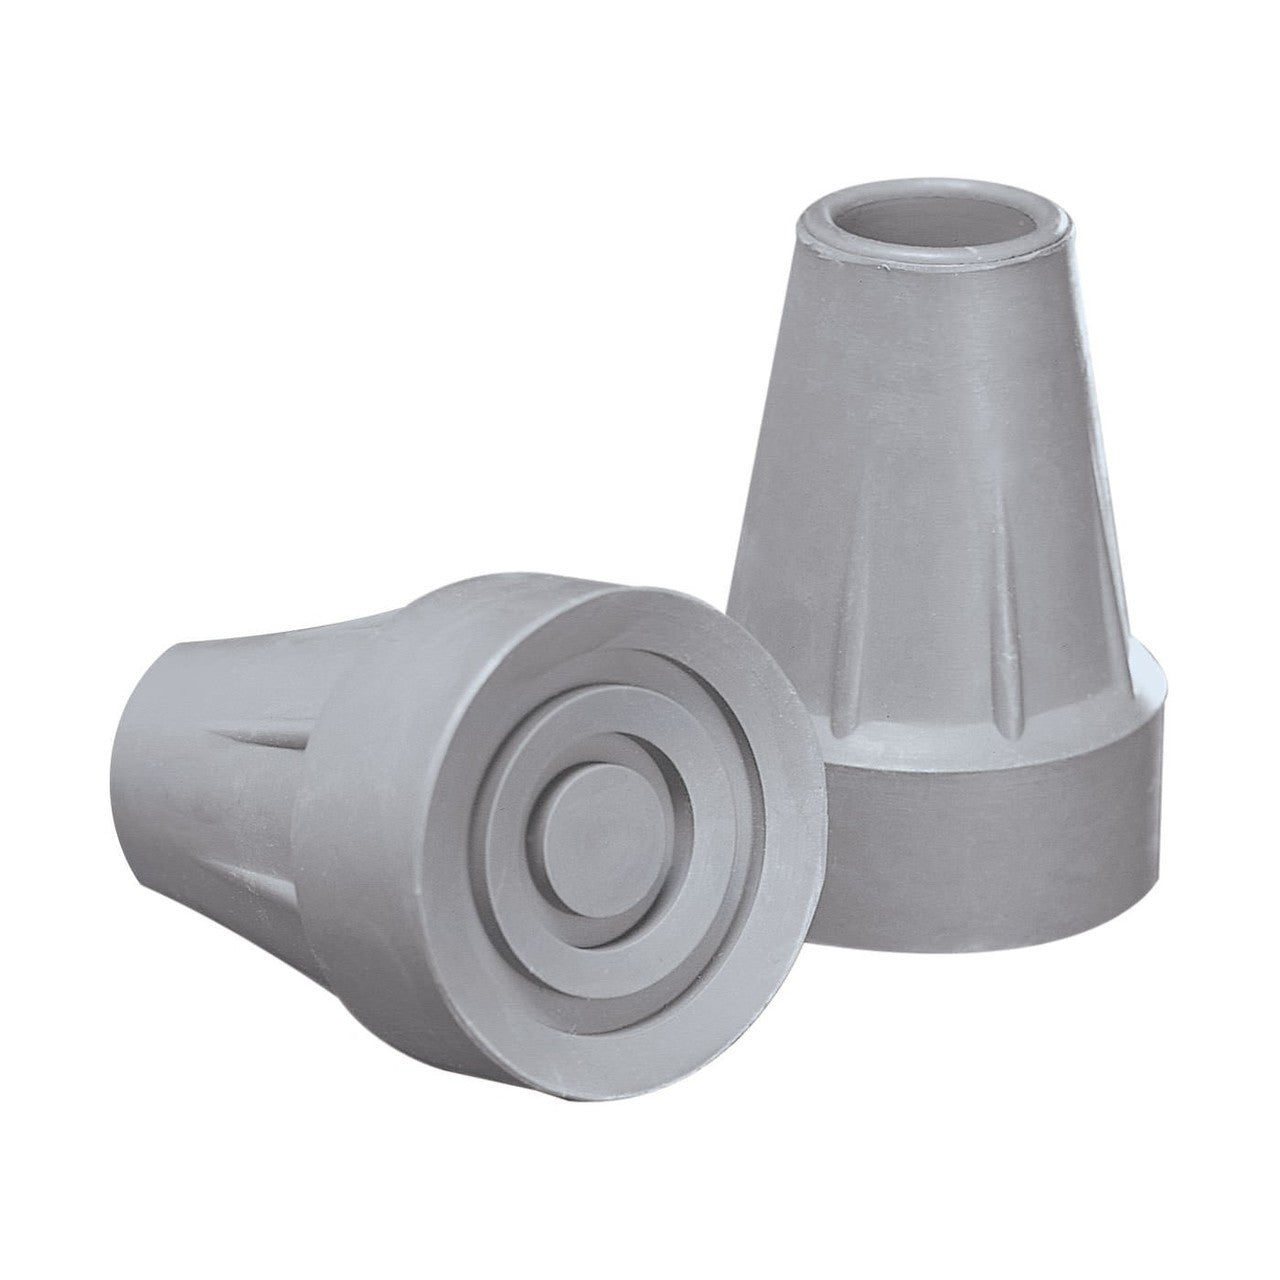 AIR 6101-G PK/2 REPLACEMENT CRUTCH TIPS LARGE GREY